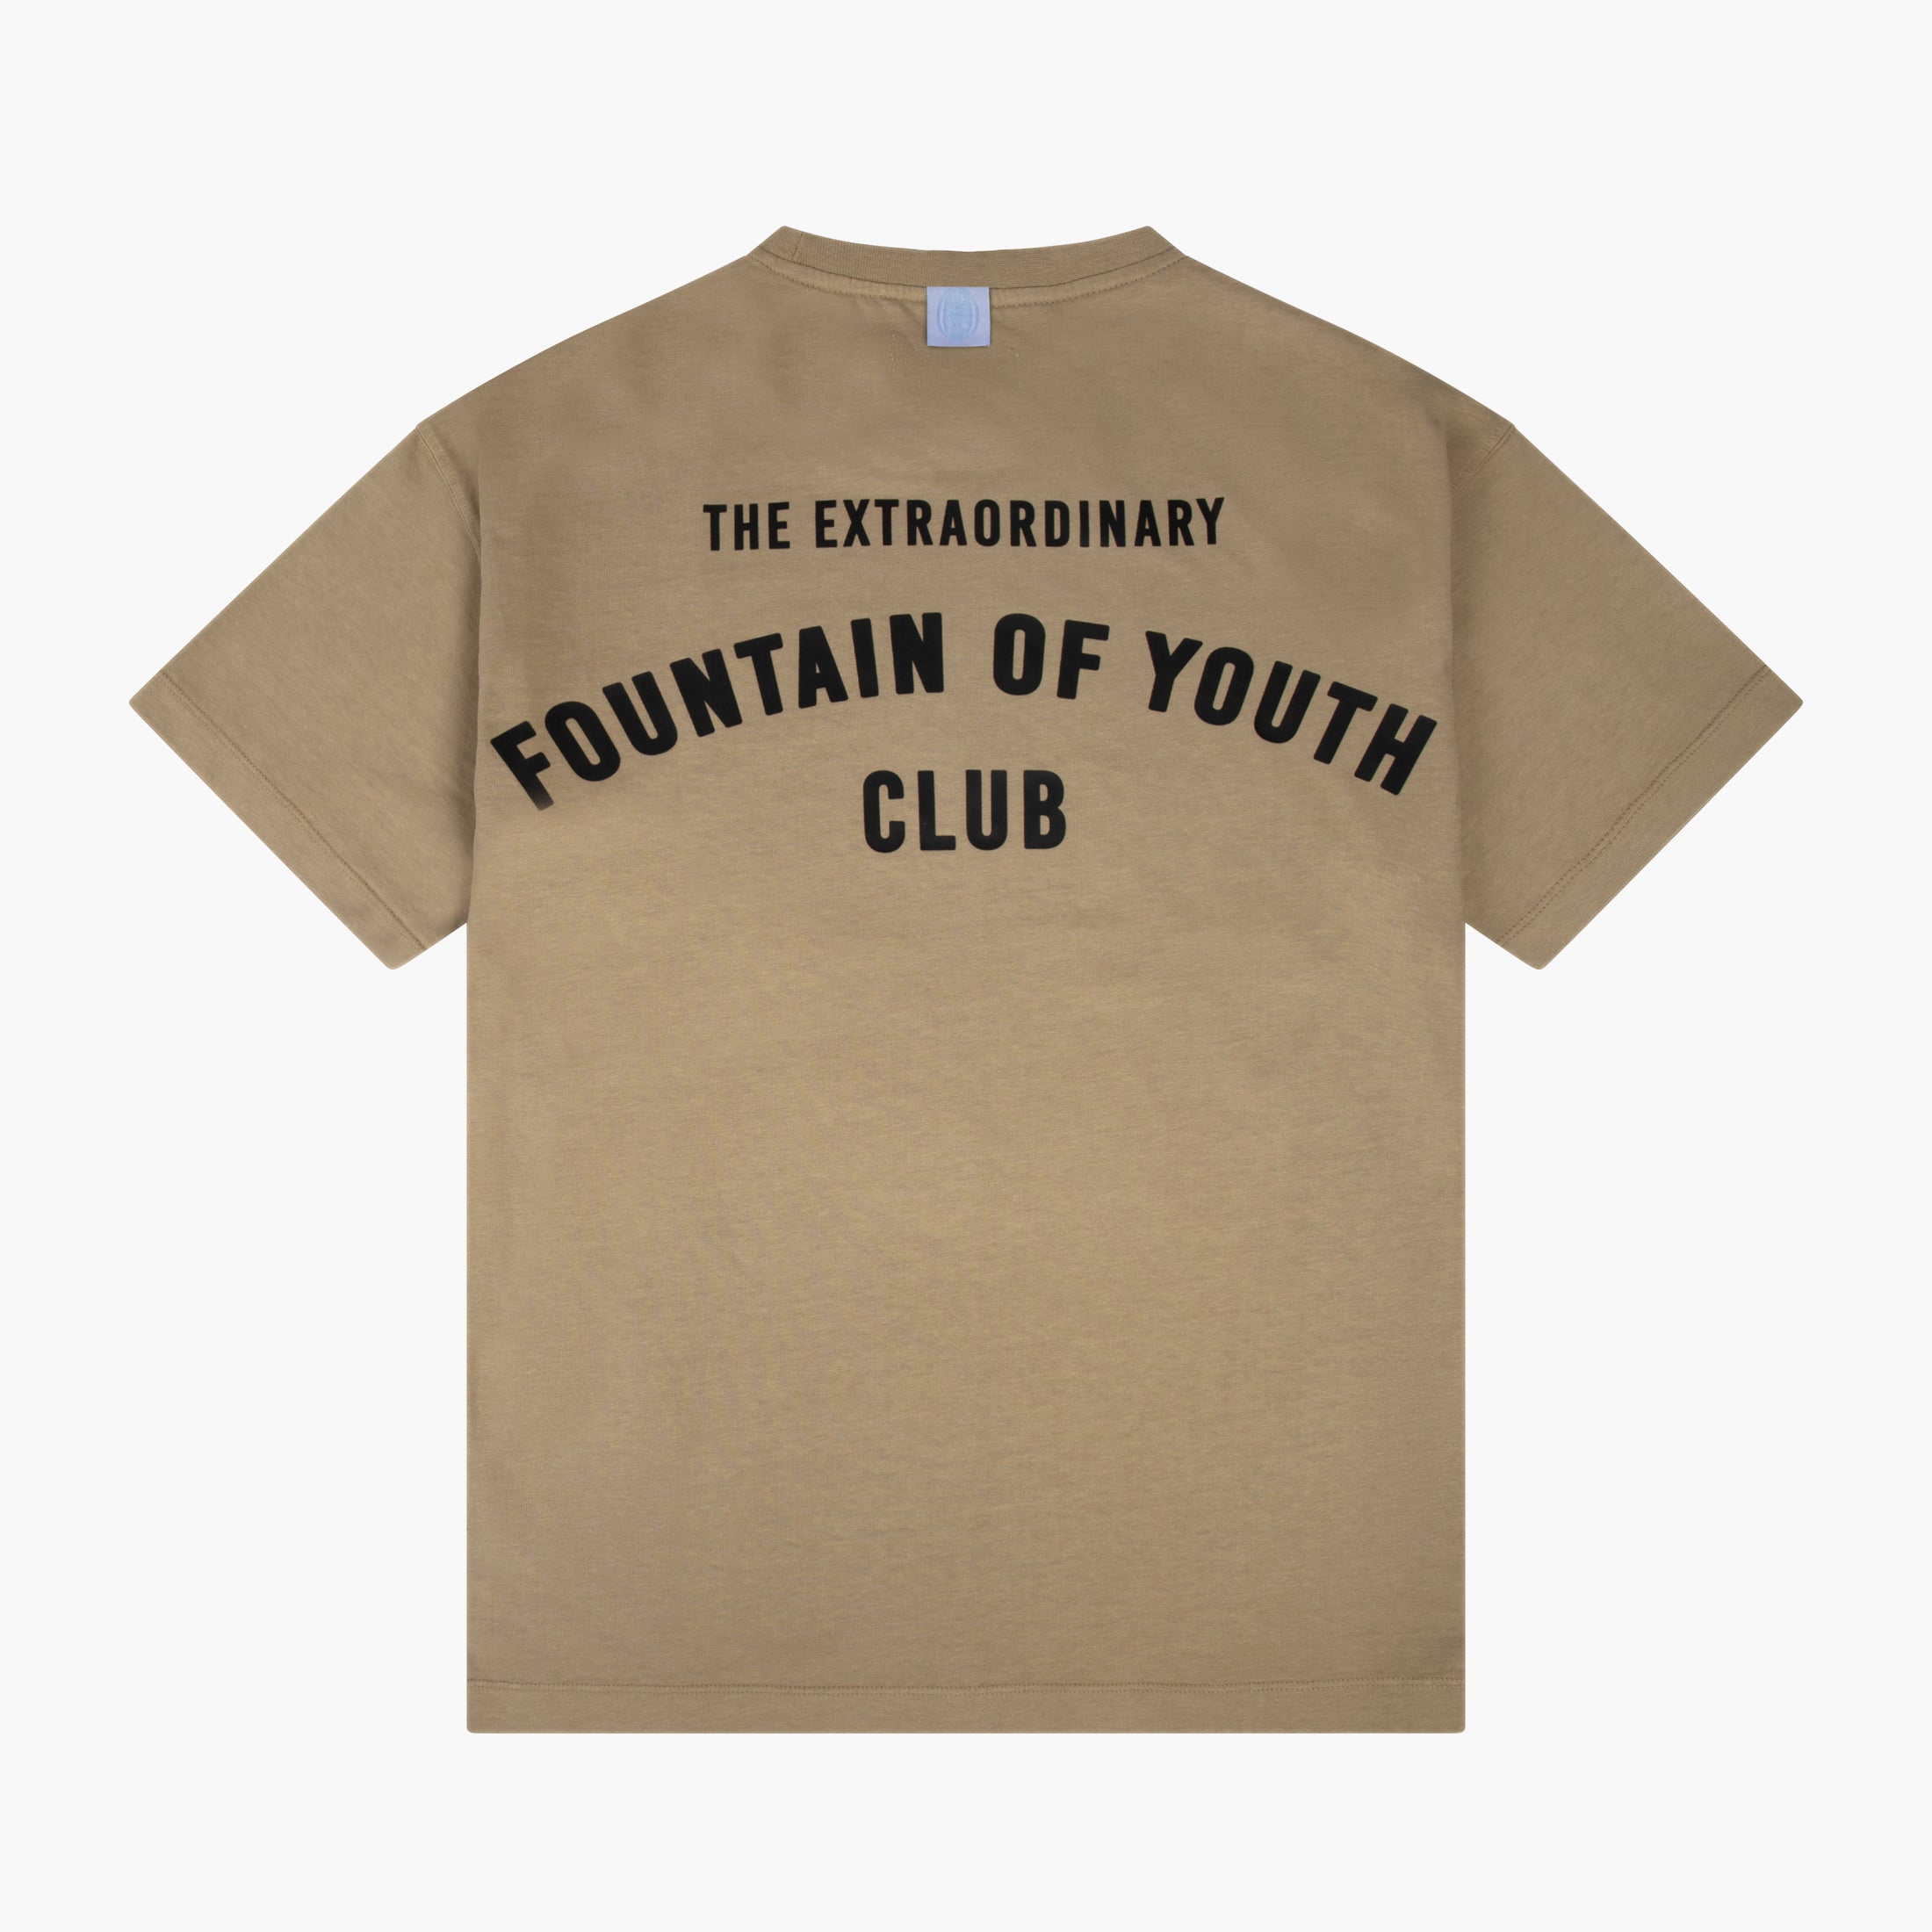 Fountain Of Youth T-Shirt Singer